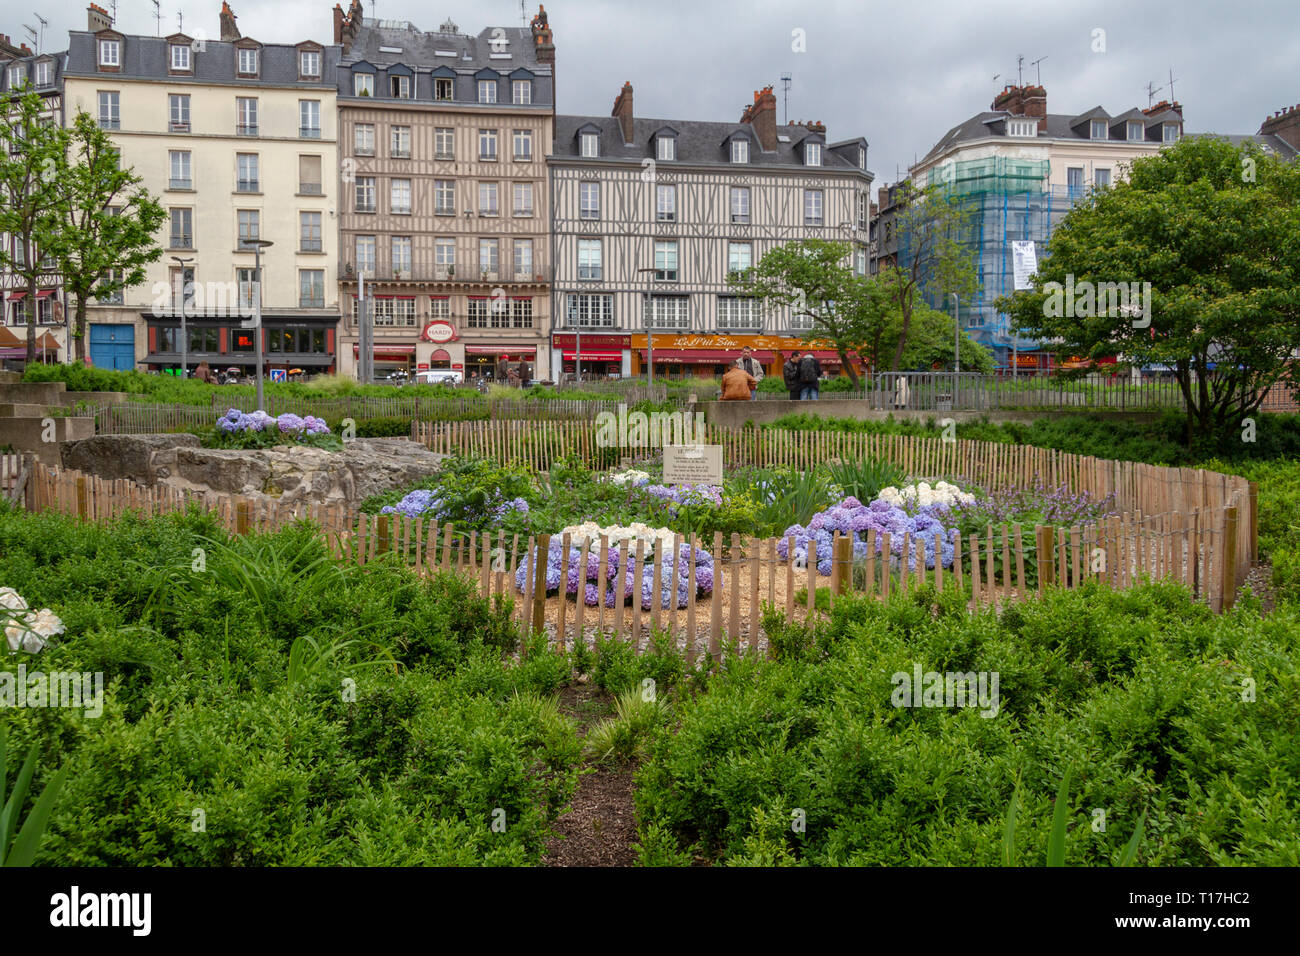 The gardens at the Joan of Arc execution site, Rouen, Haute-Normandie (Upper Normandy, France. Stock Photo